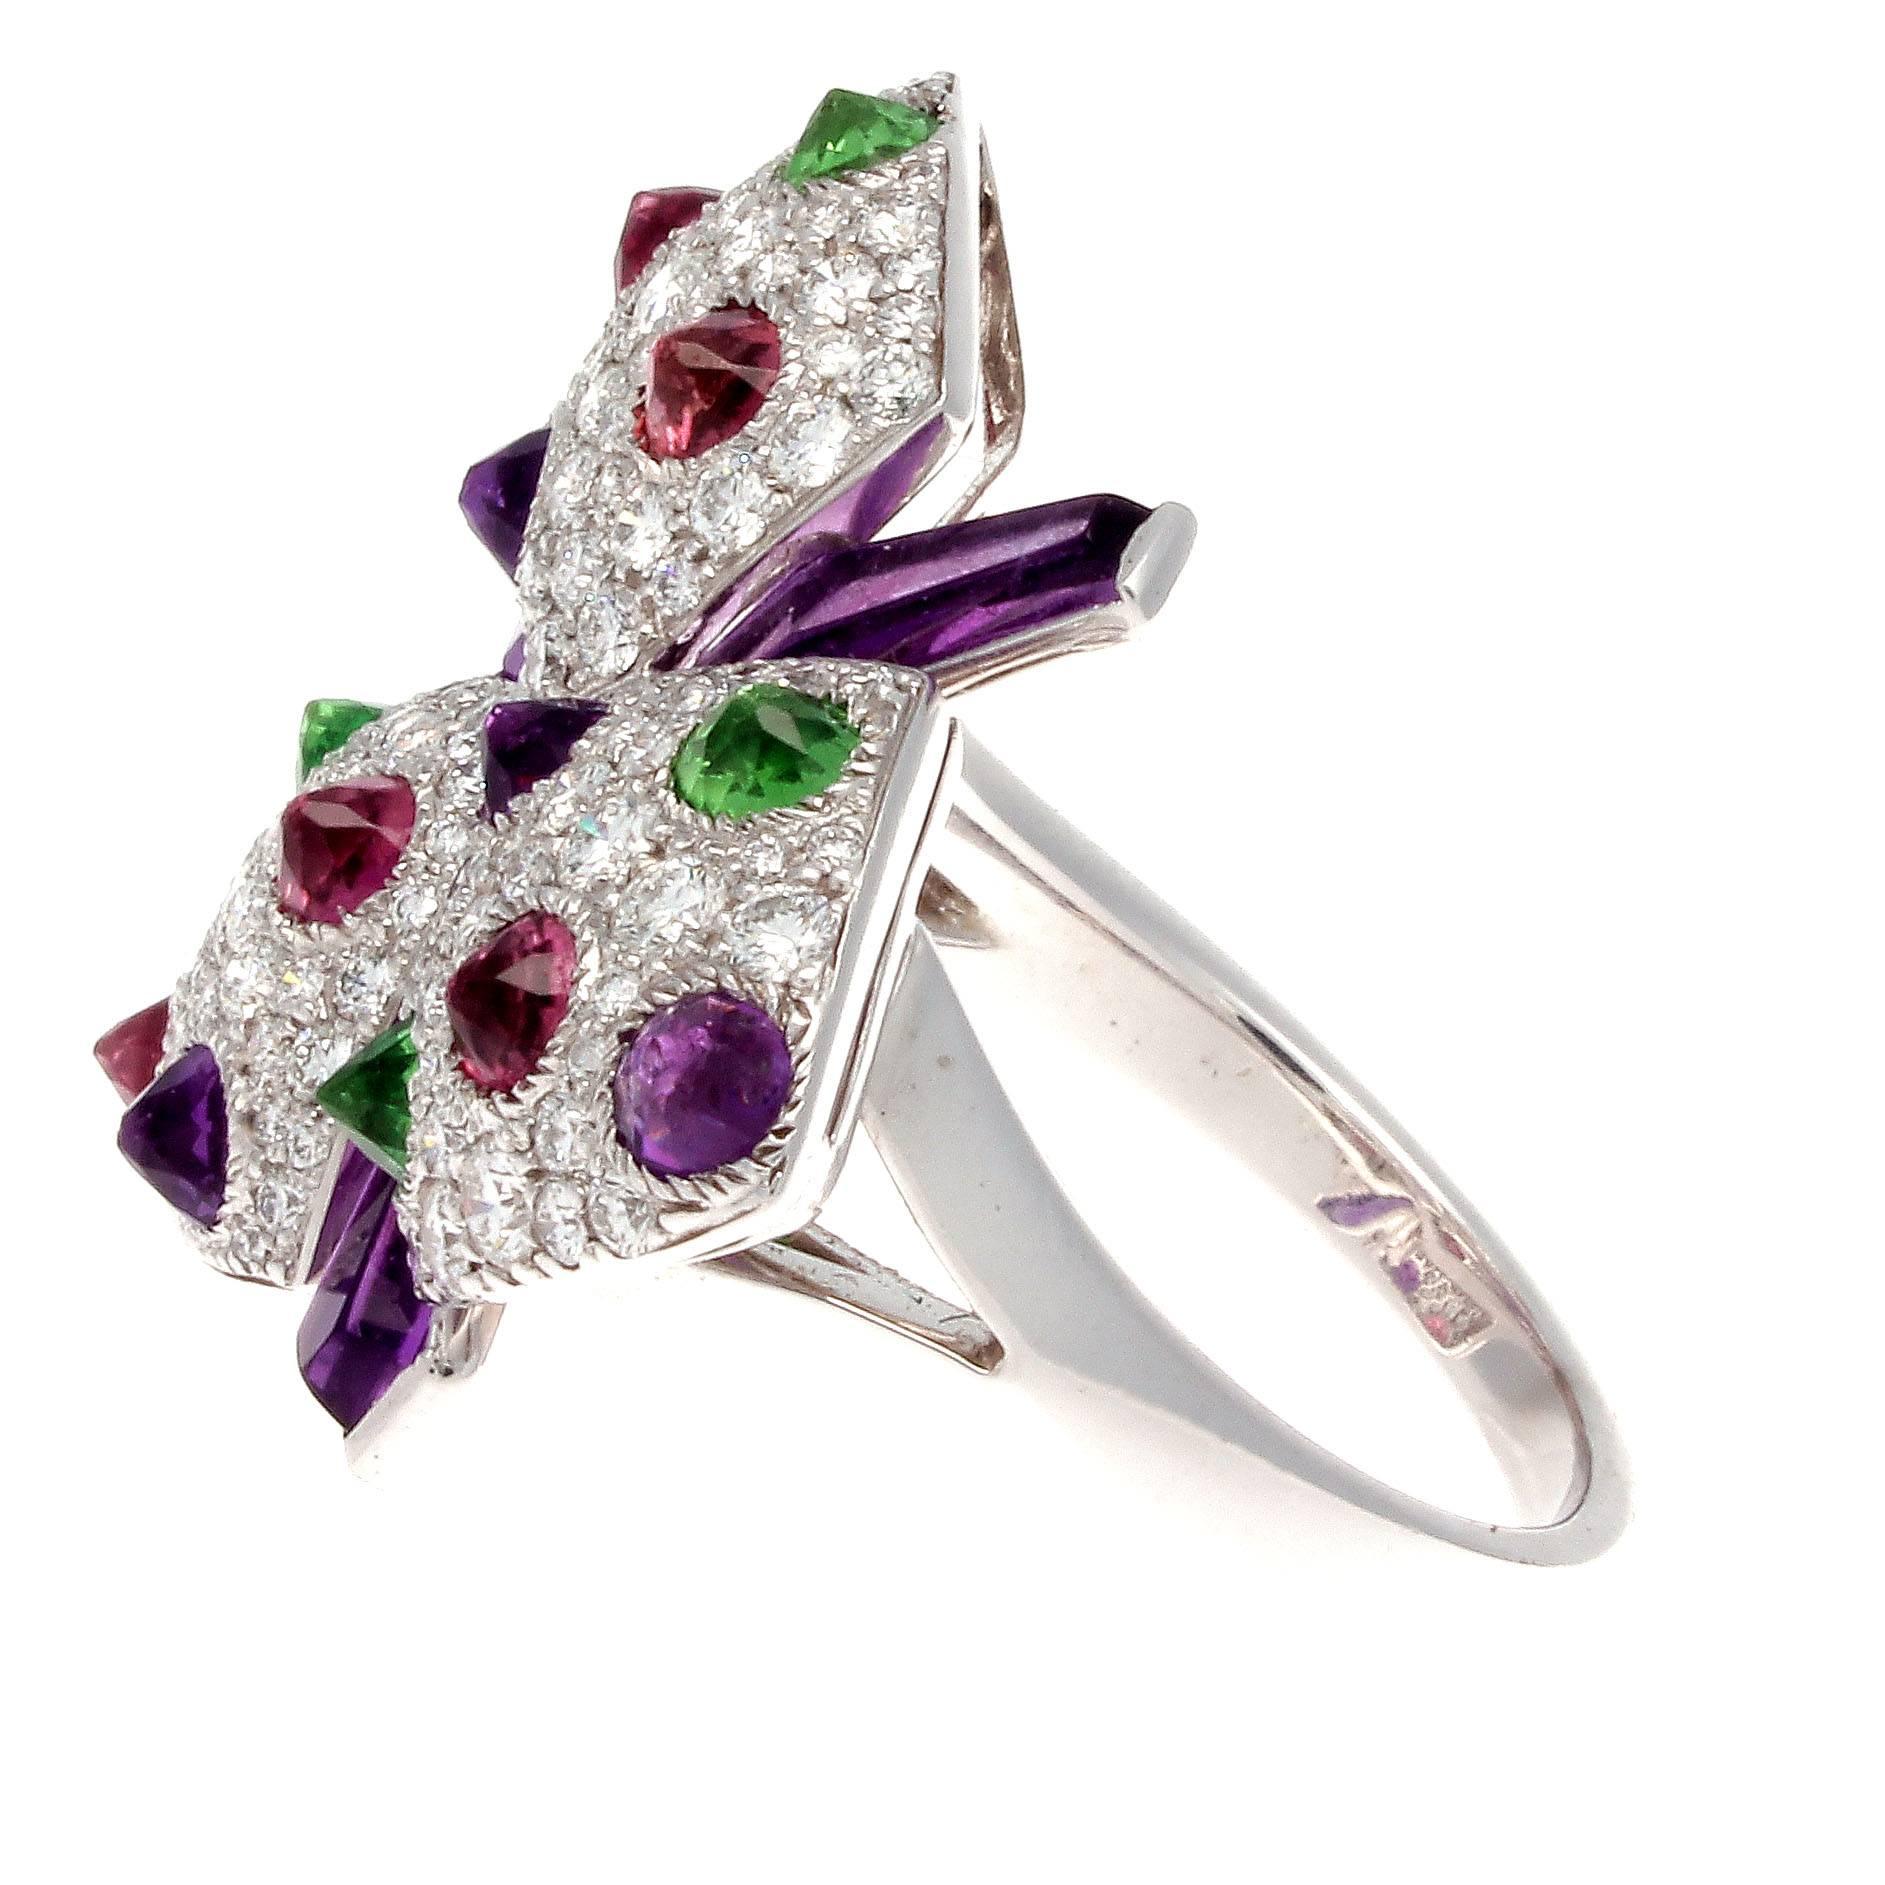 A blossoming flower of color from the orchid collection masterminded by Cartier. Featuring pedals with white, clean diamonds interspersed with color from the bright translucent cabochon green garnet, red rubelite and purple amethyst. Further